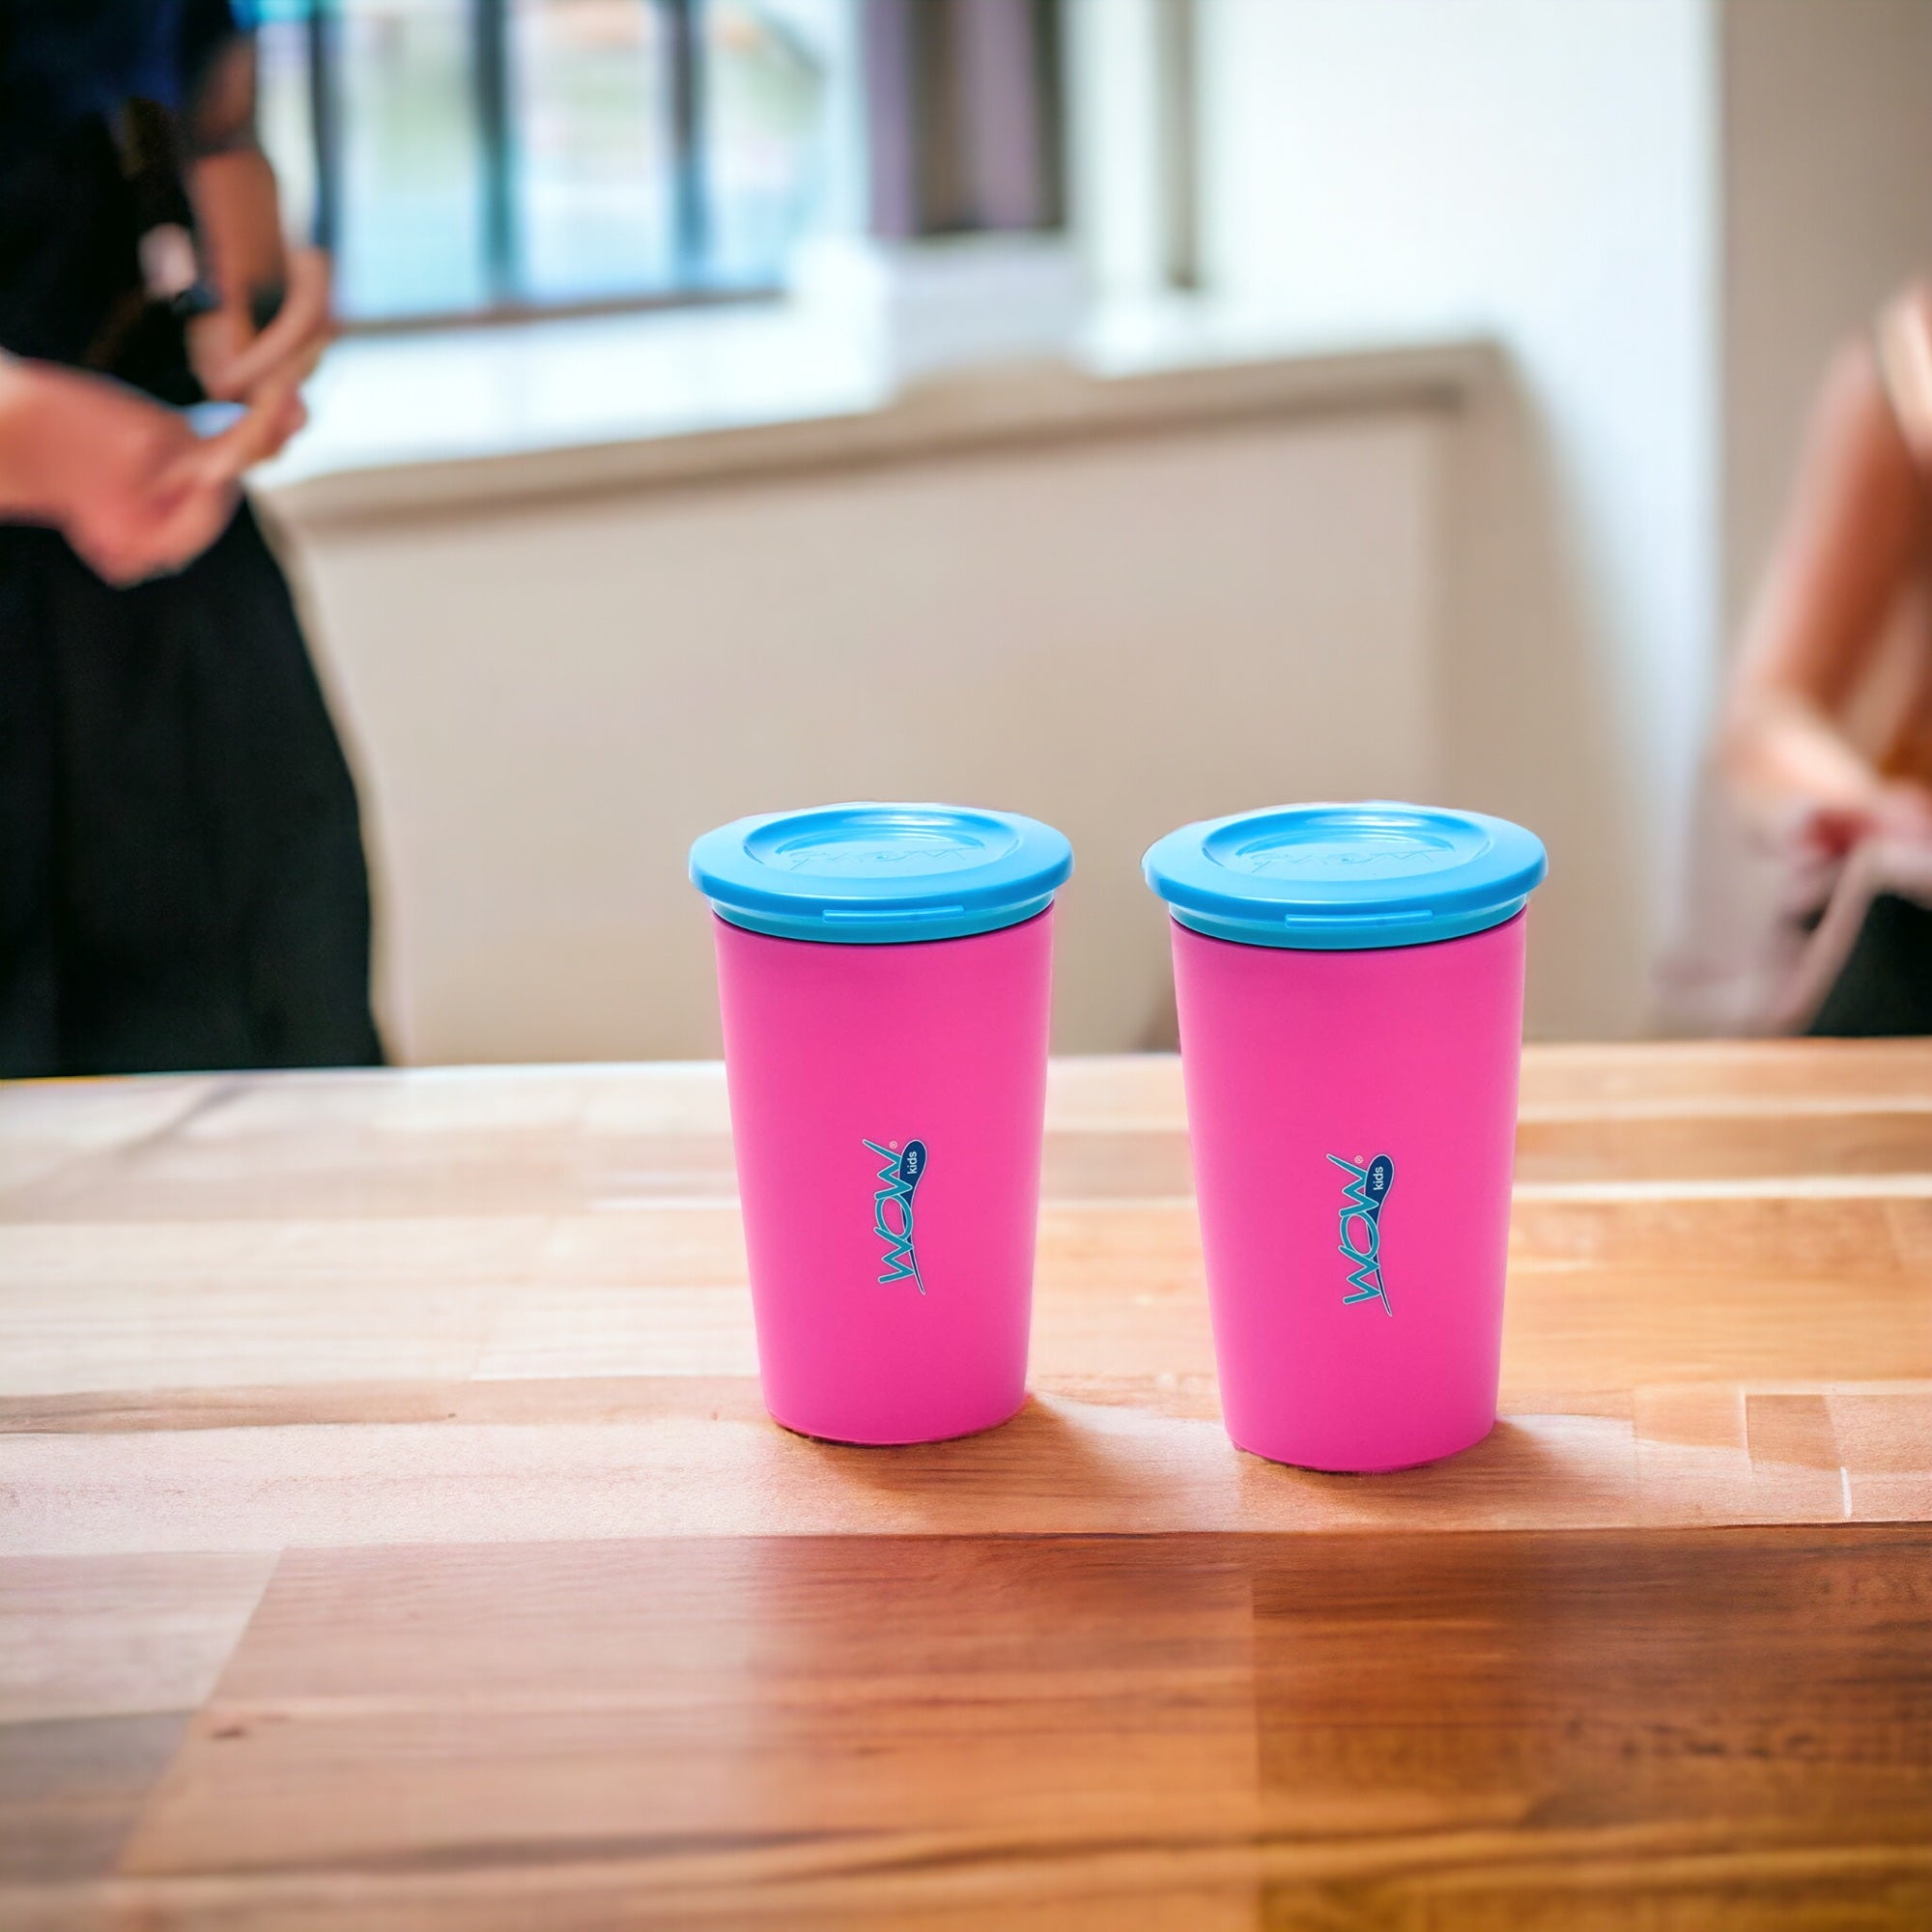 XL Spill Proof Sippy Cup